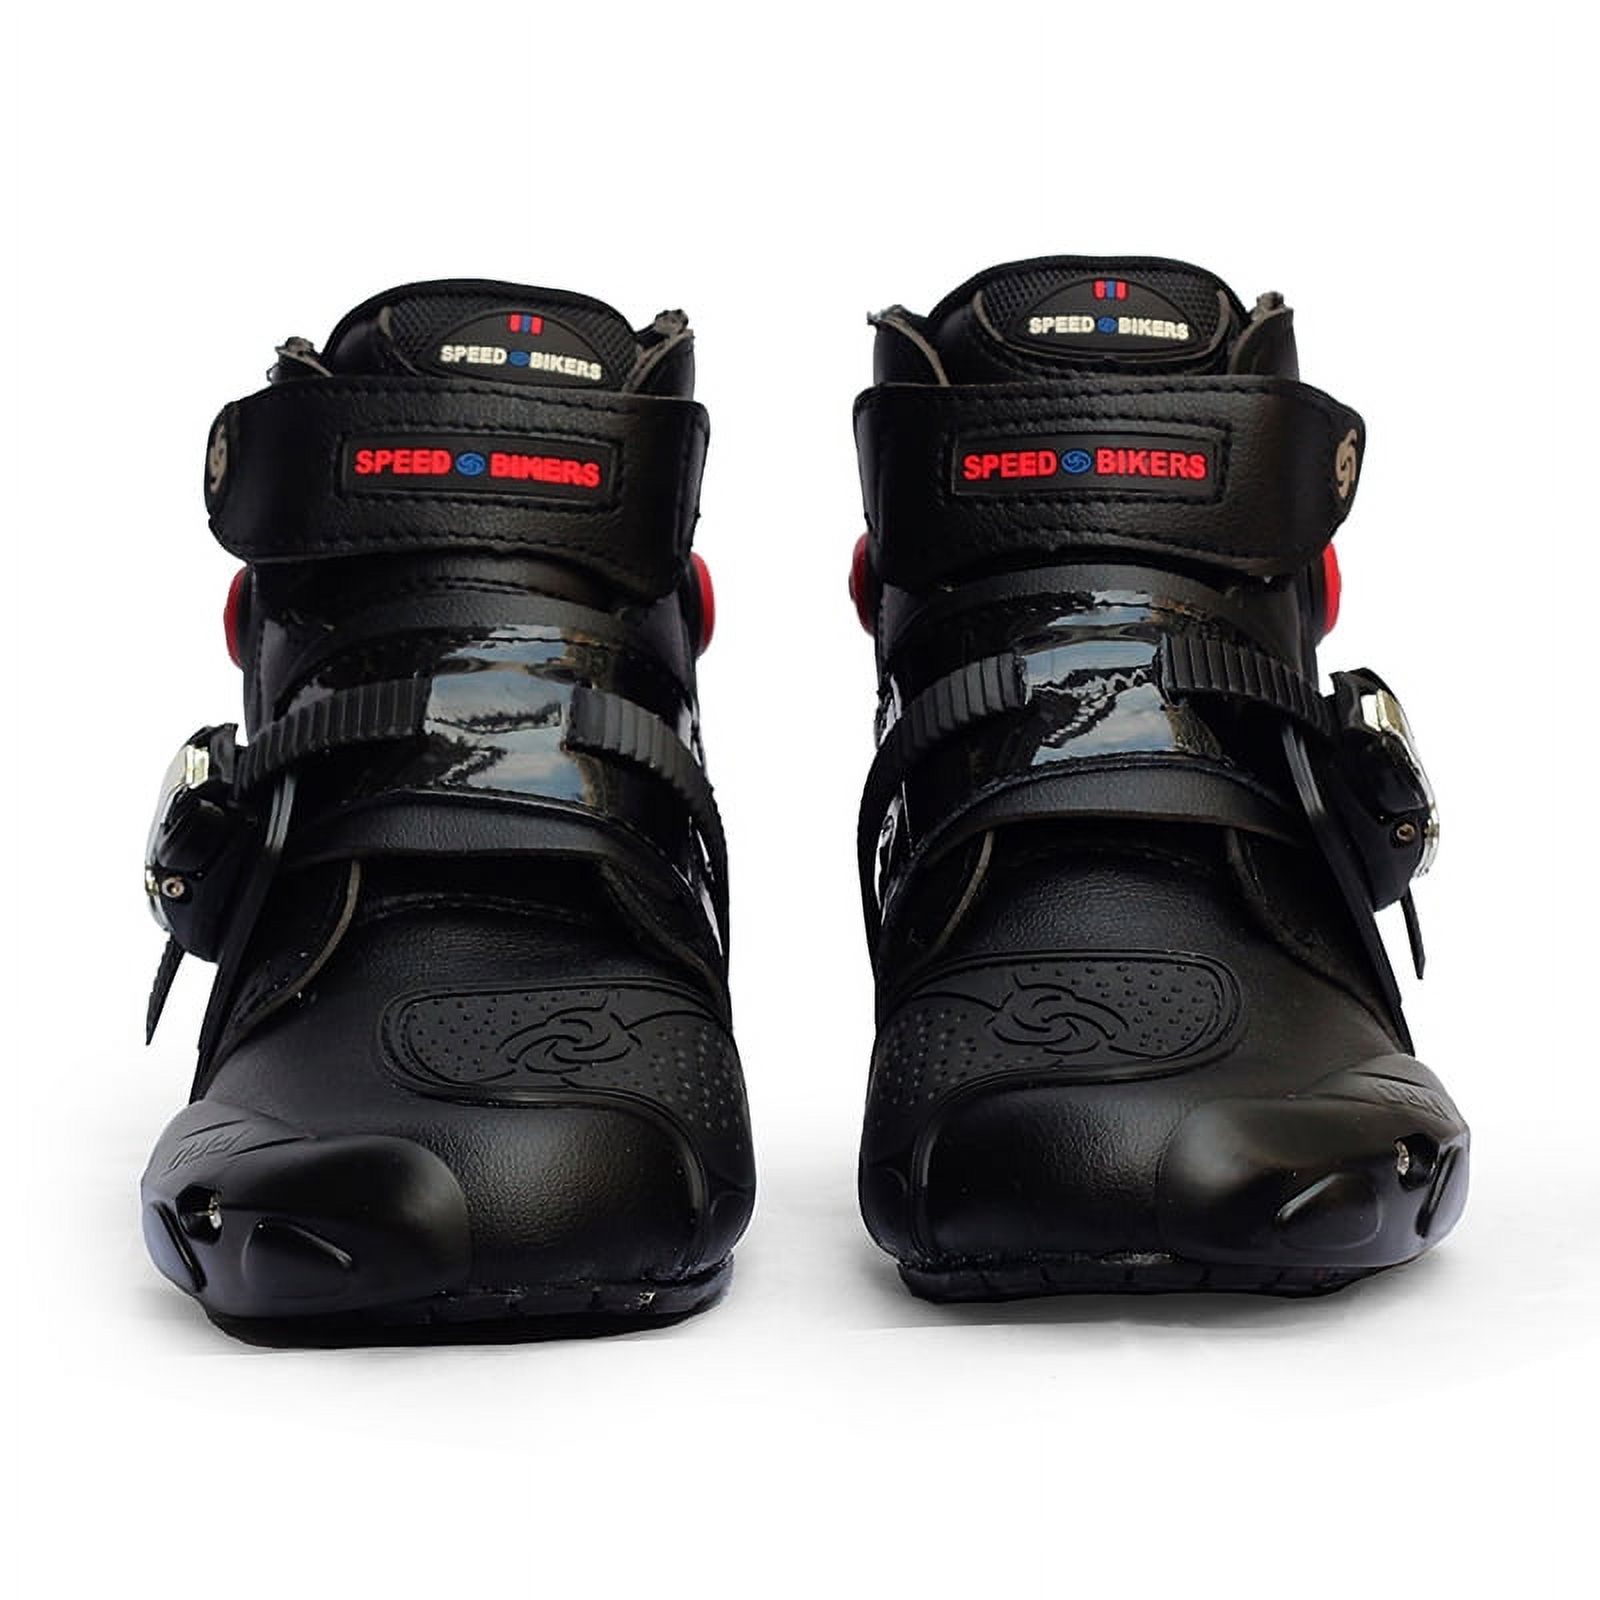 Men Soft Motorcycle Boots Biker Waterproof Speed Motocross Boots Non-slip Motorcycle Shoes Color:black Shoe US Size:9.5 - image 1 of 8